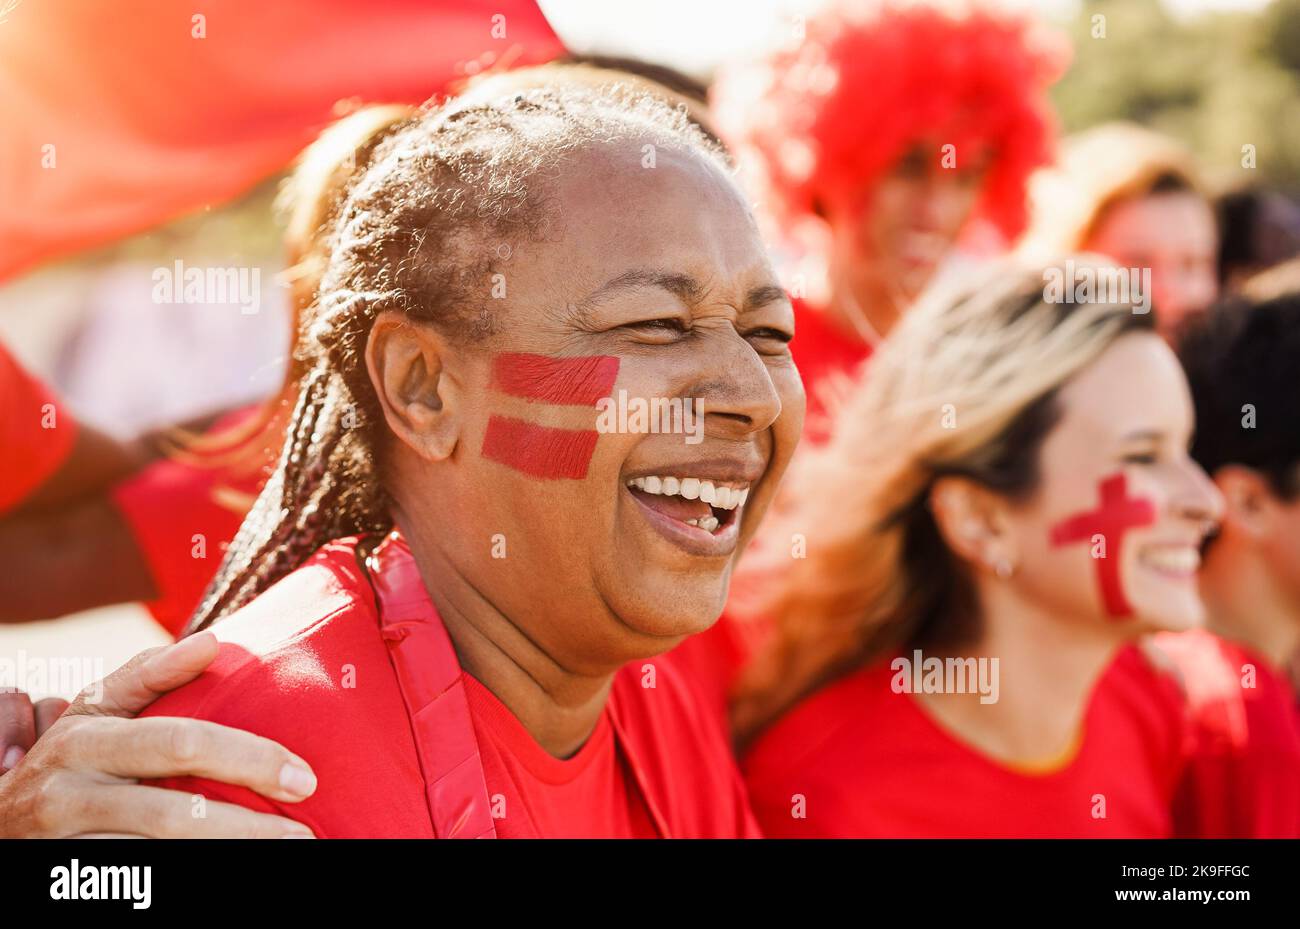 African senior red sport fan supporting their team - Multiracial football supporters having fun at competition event - Focus on woman face Stock Photo